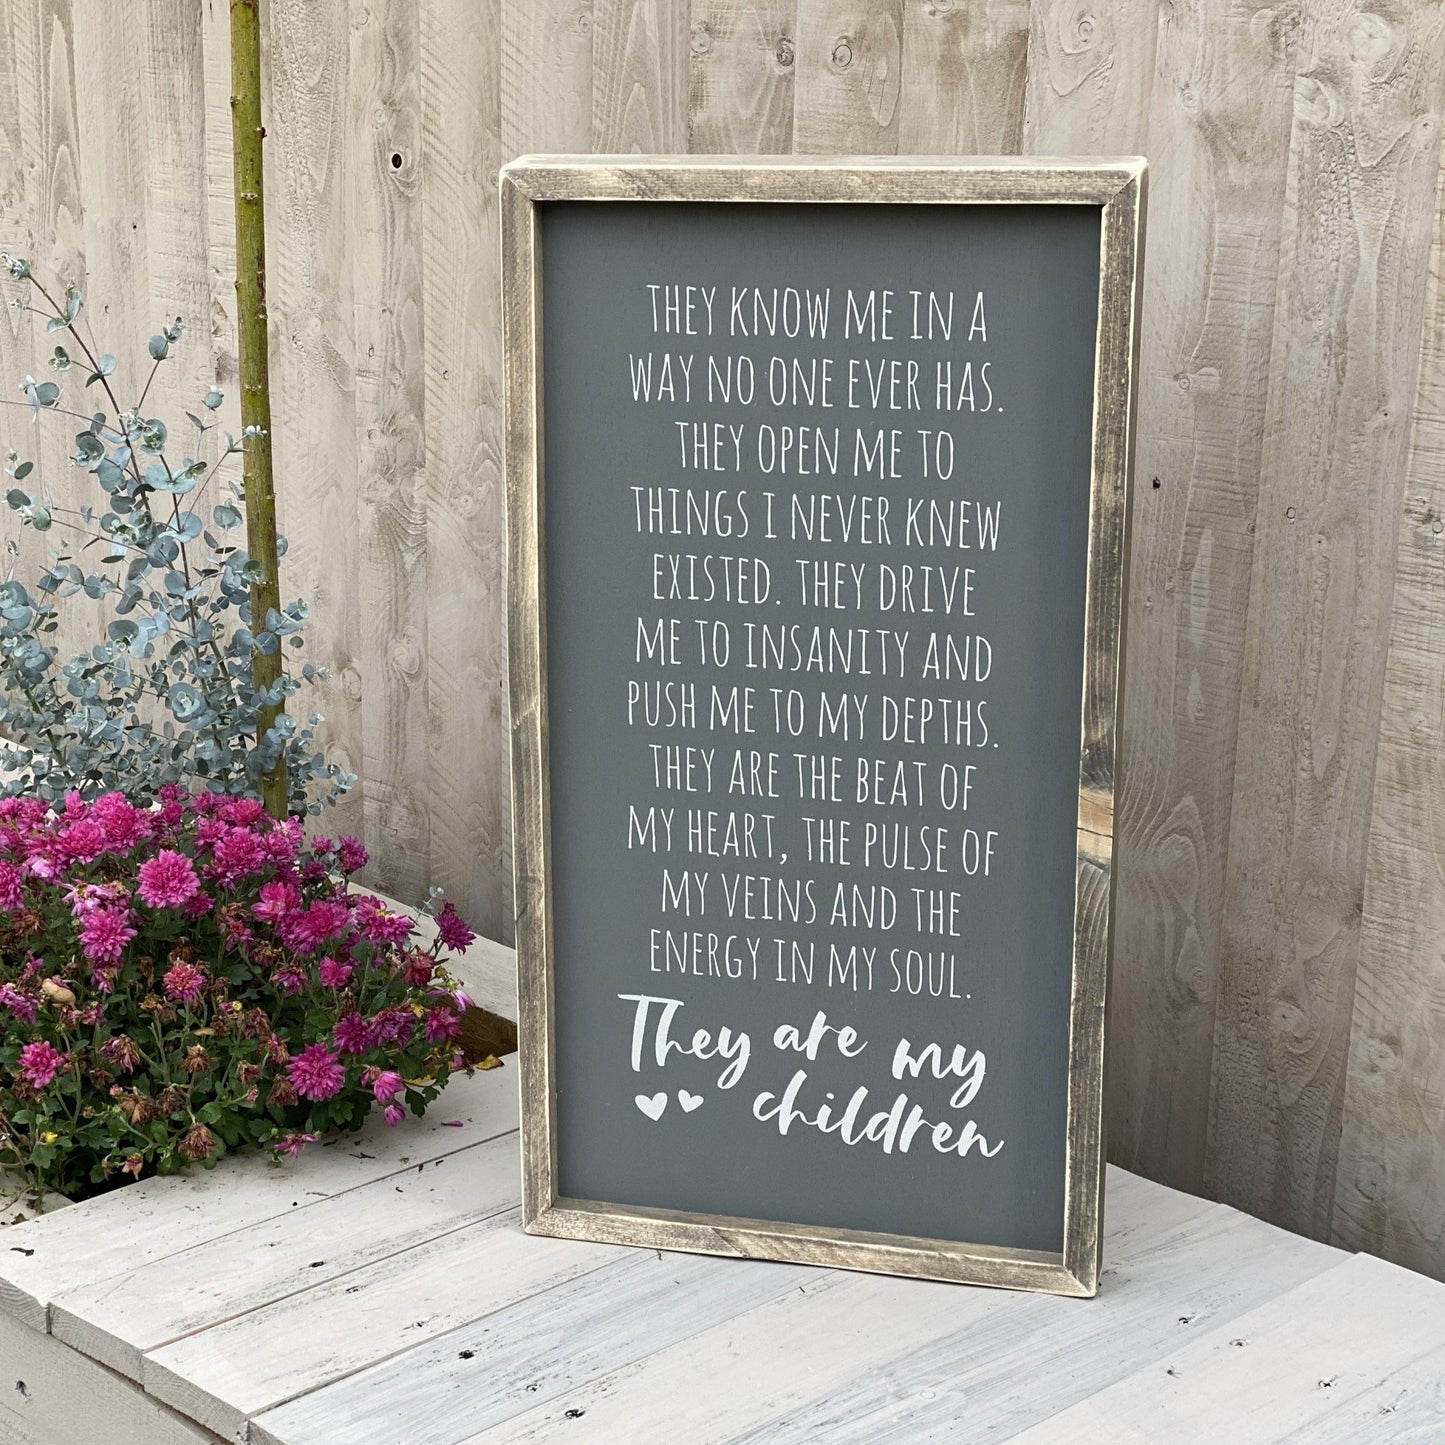 My Children | Framed Wood Sign - The Imperfect Wood Company - Framed Wood Sign